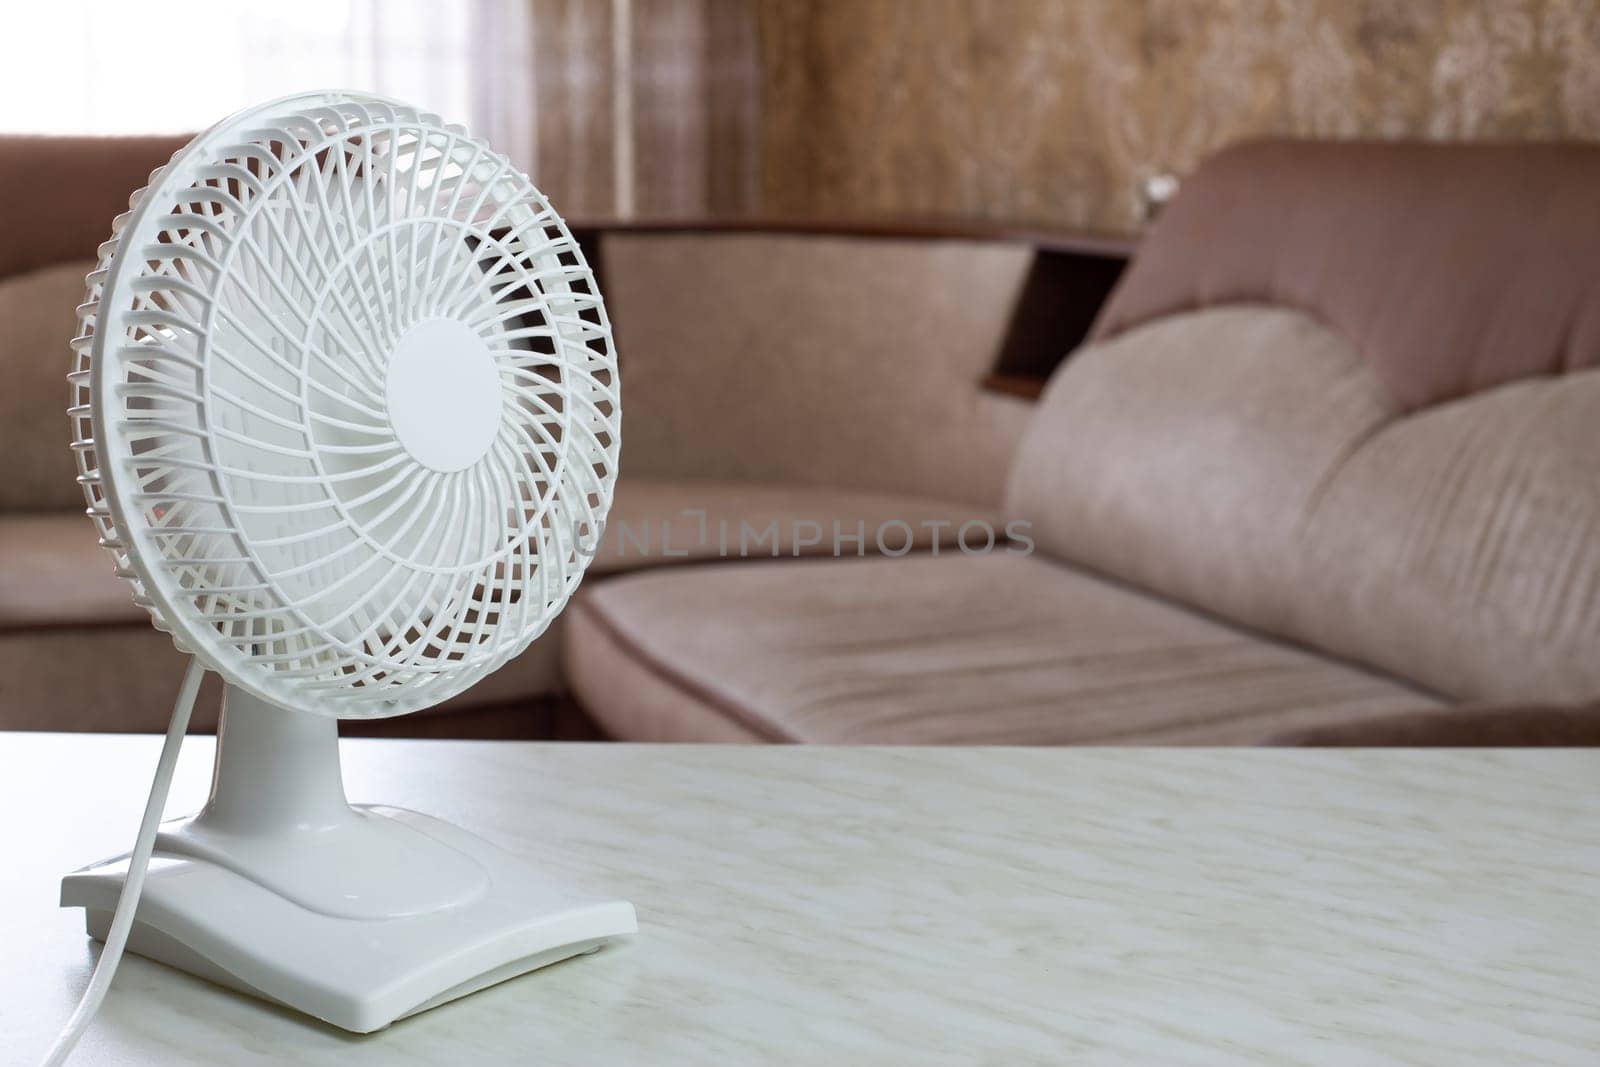 Tabletop compact white plastic fan with included blades disperses cold air throughout the home room against the backdrop of the sofa on hot day